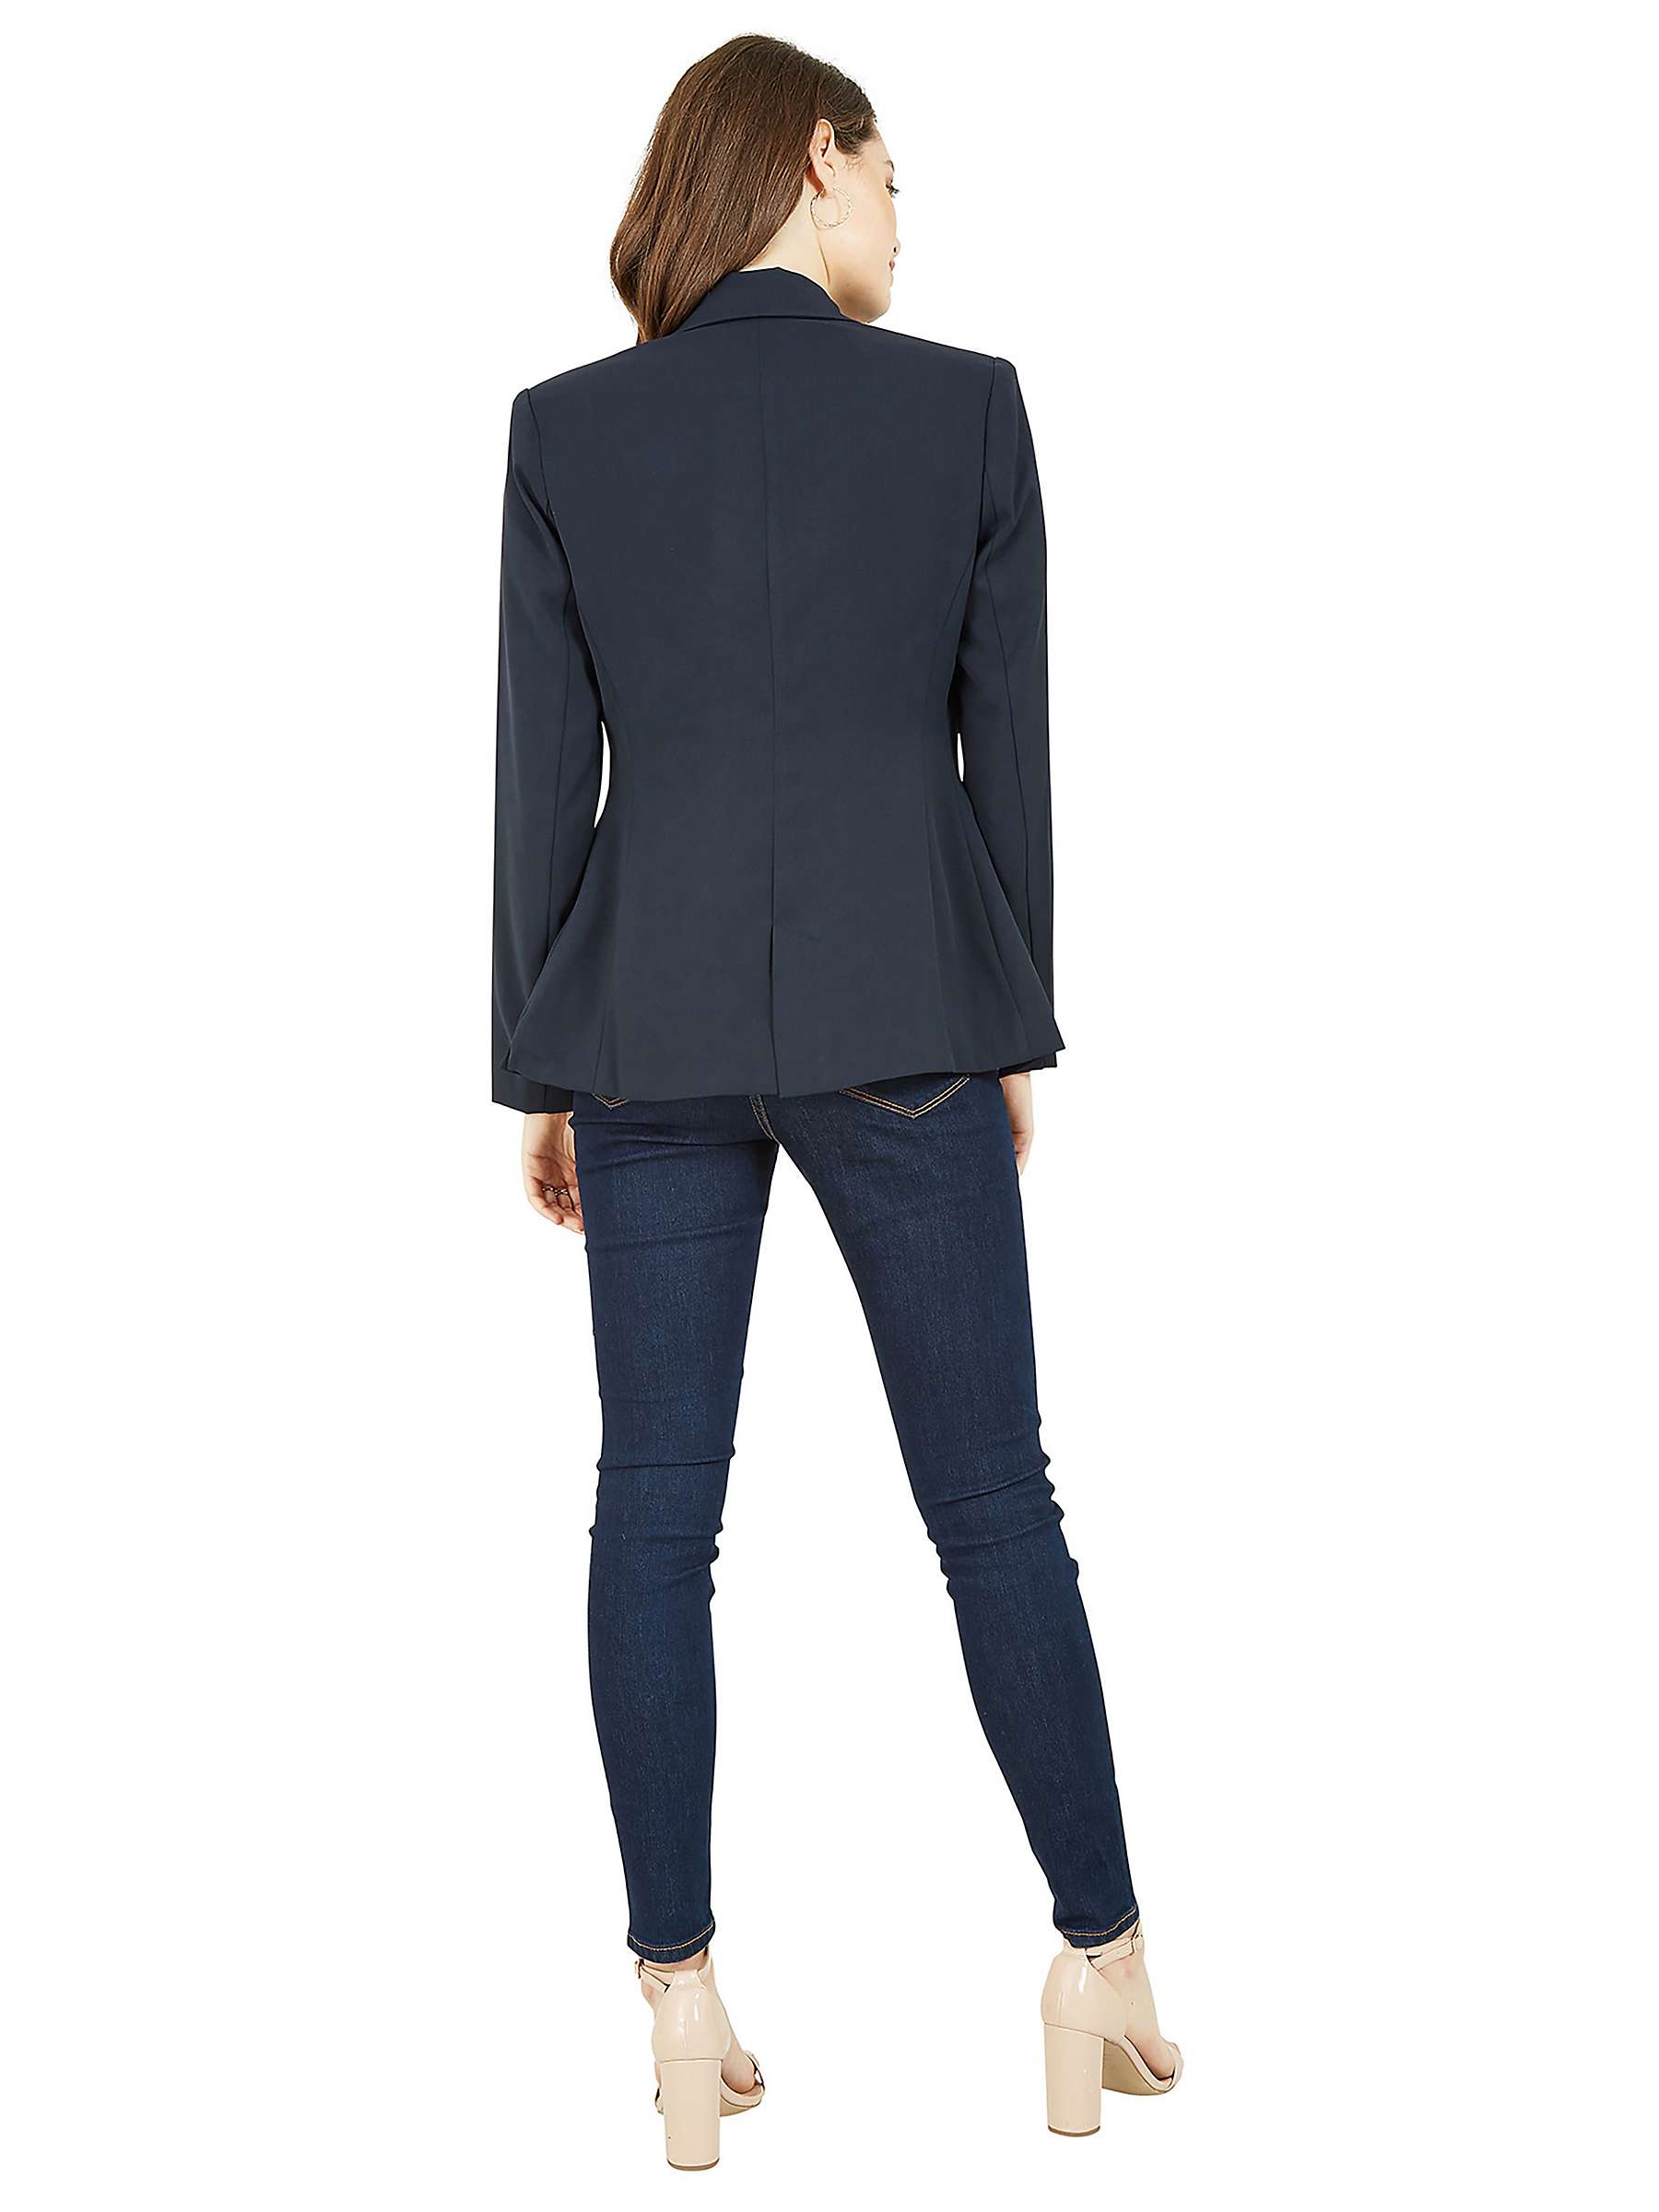 Buy Yumi Double Breasted Blazer Online at johnlewis.com